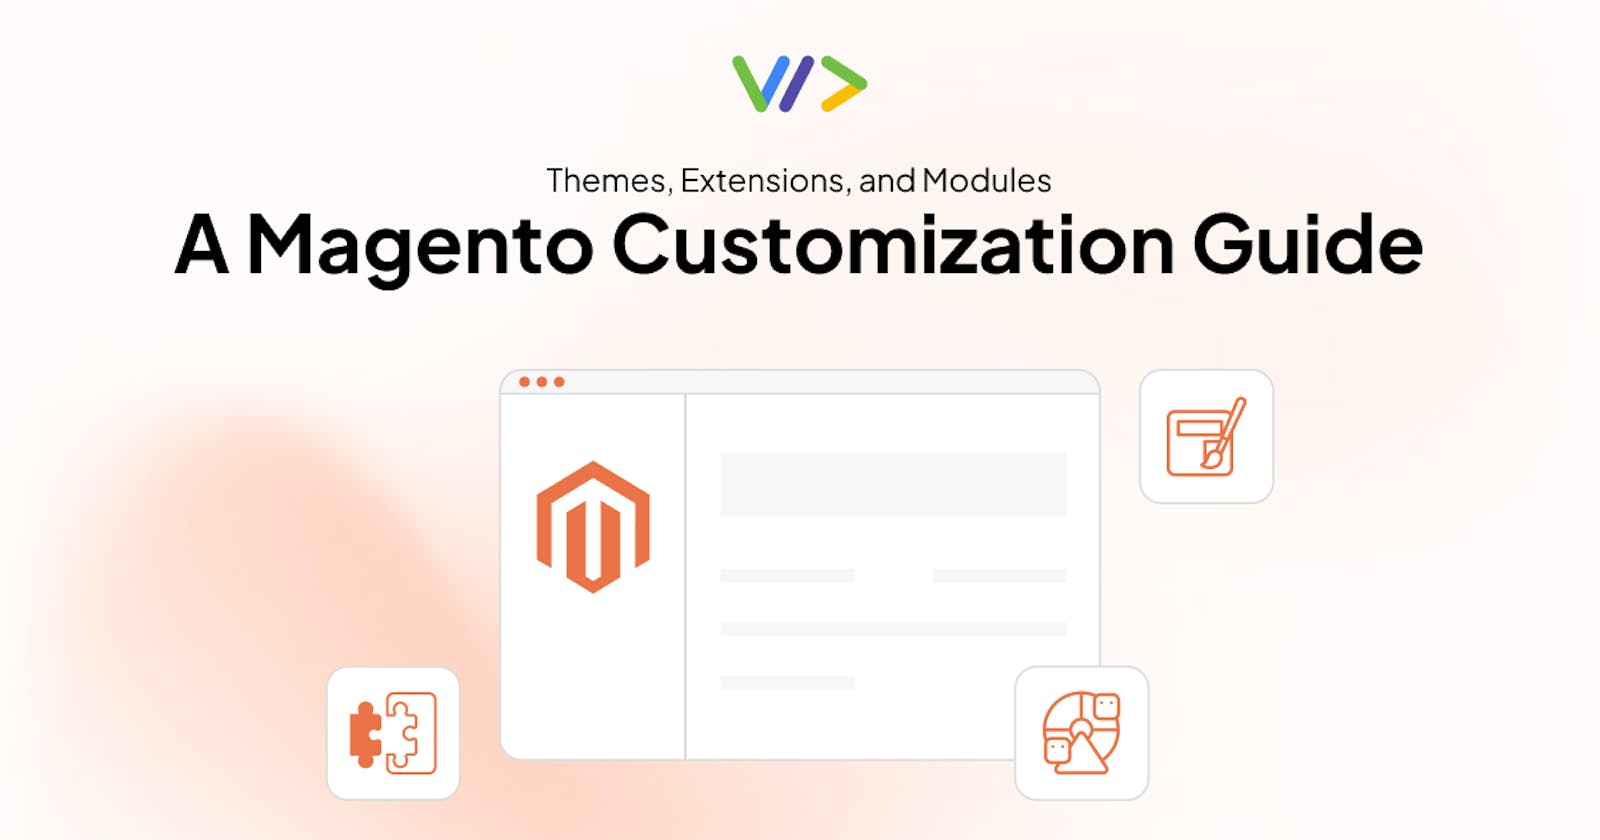 Themes, Extensions, and Modules: A Magento Customization Guide